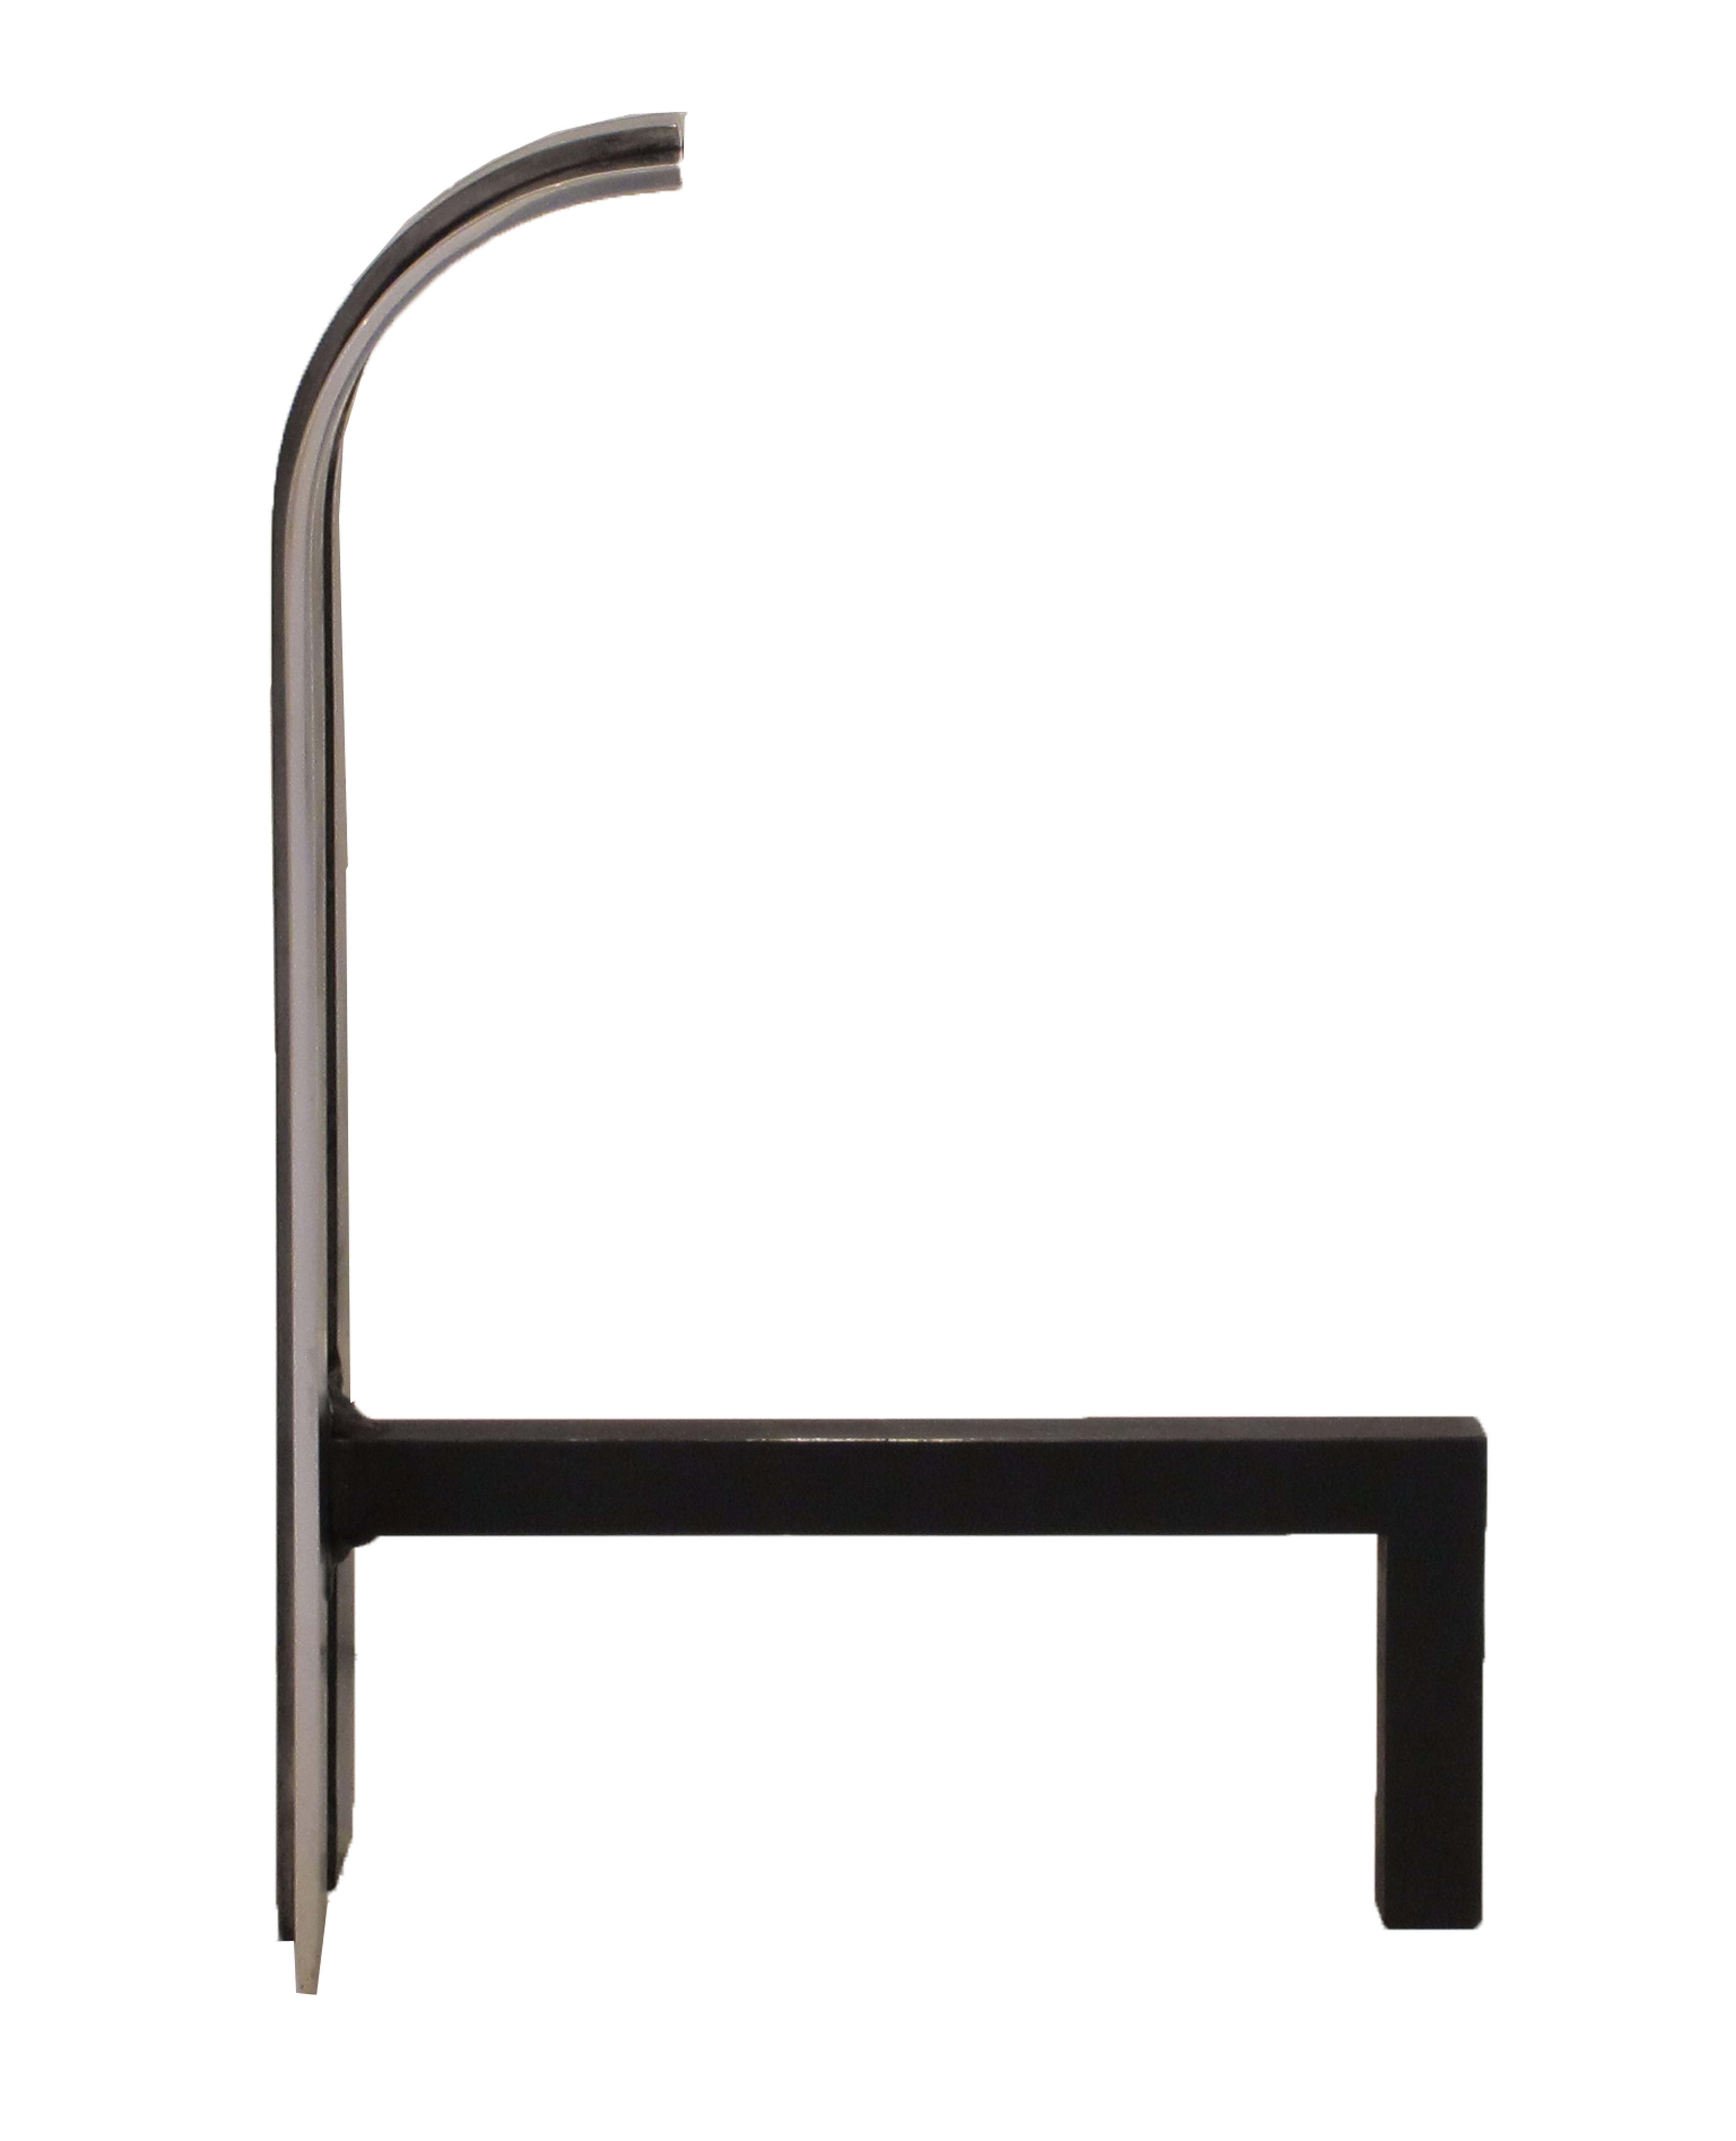 American Andirons by Danny Alessandro in Polished Nickel and Matte Black